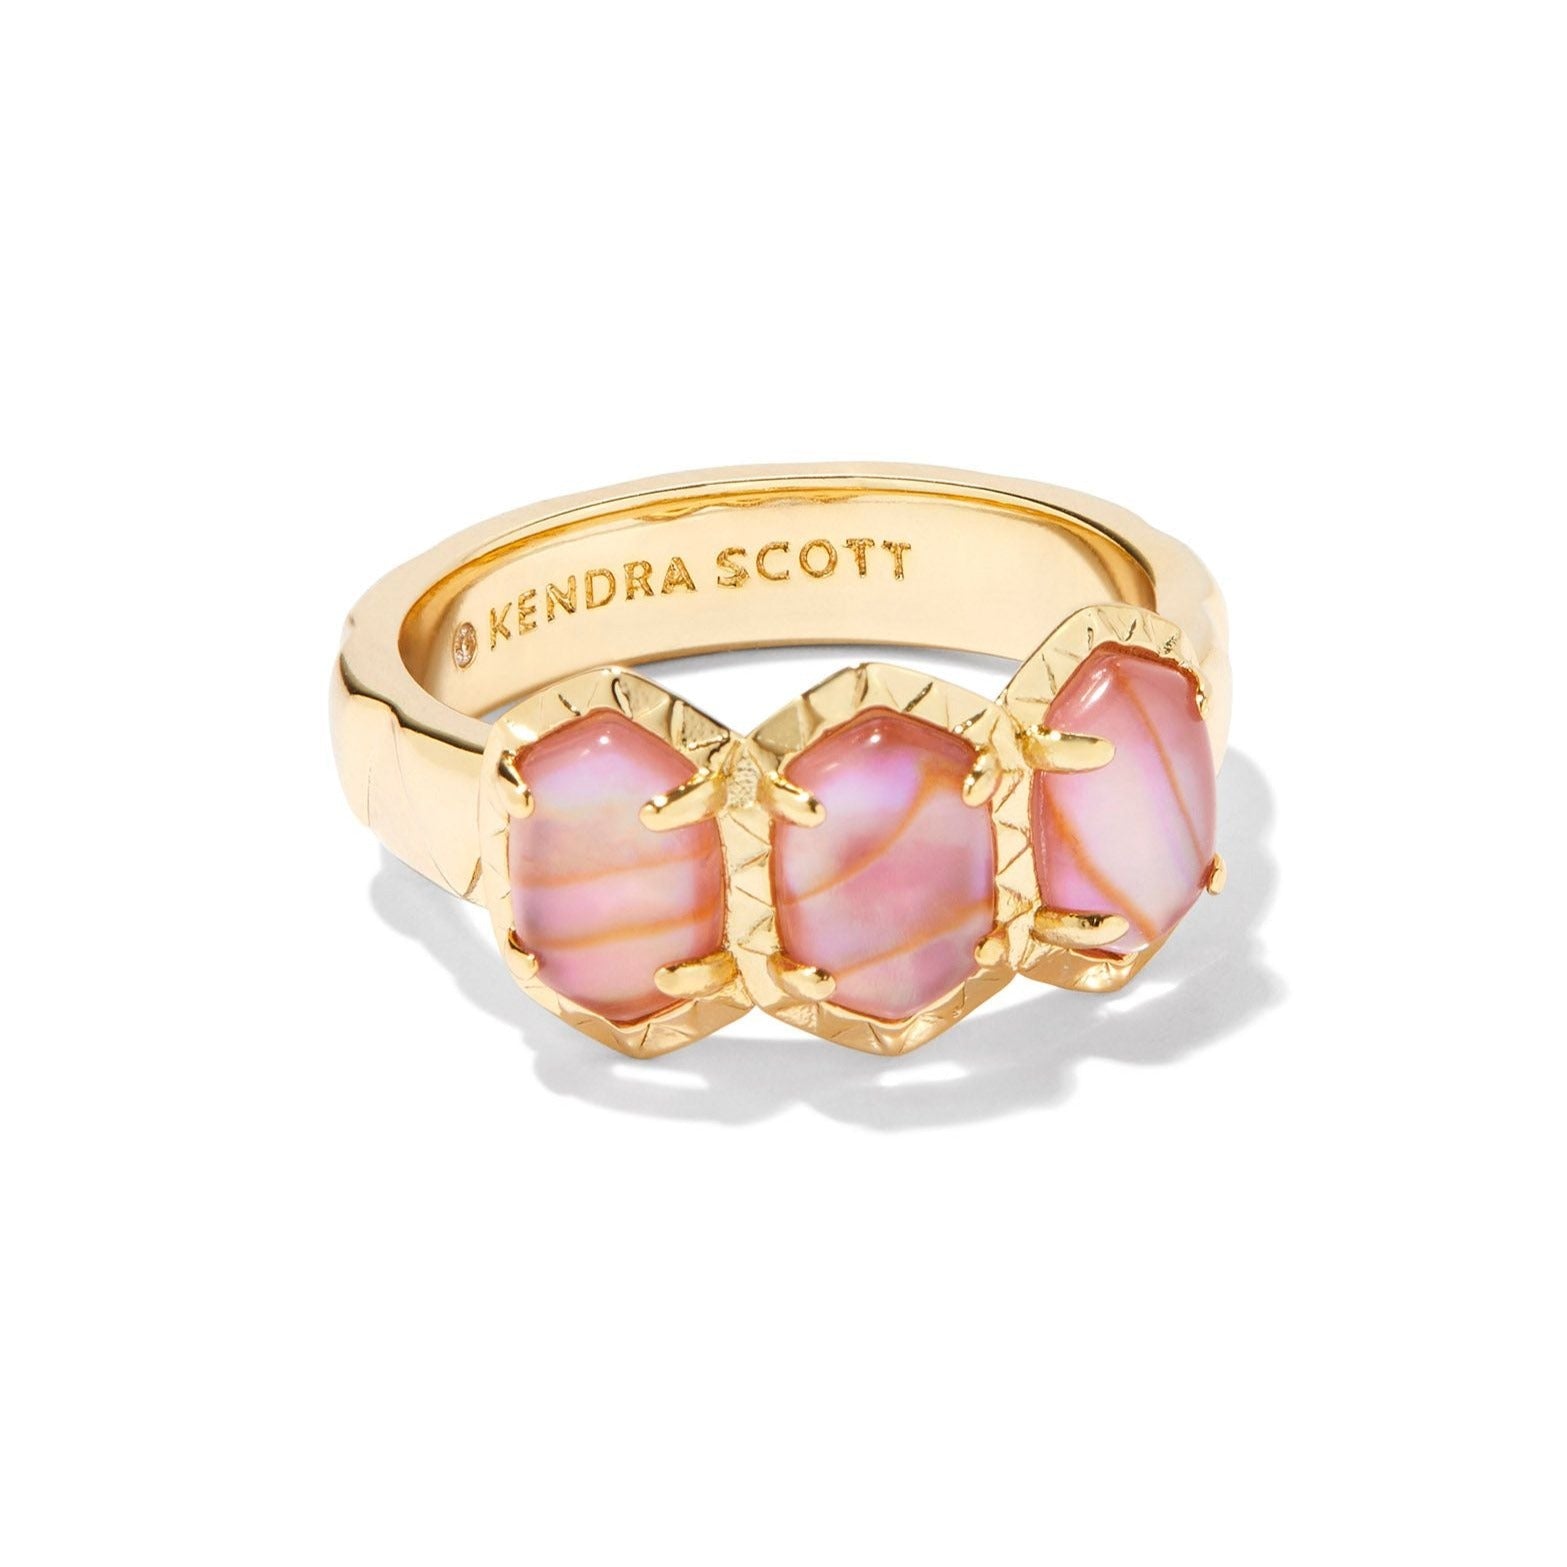 Kendra Scott | Daphne Gold Band Ring in Light Pink Iridescent Abalone - Giddy Up Glamour Boutique